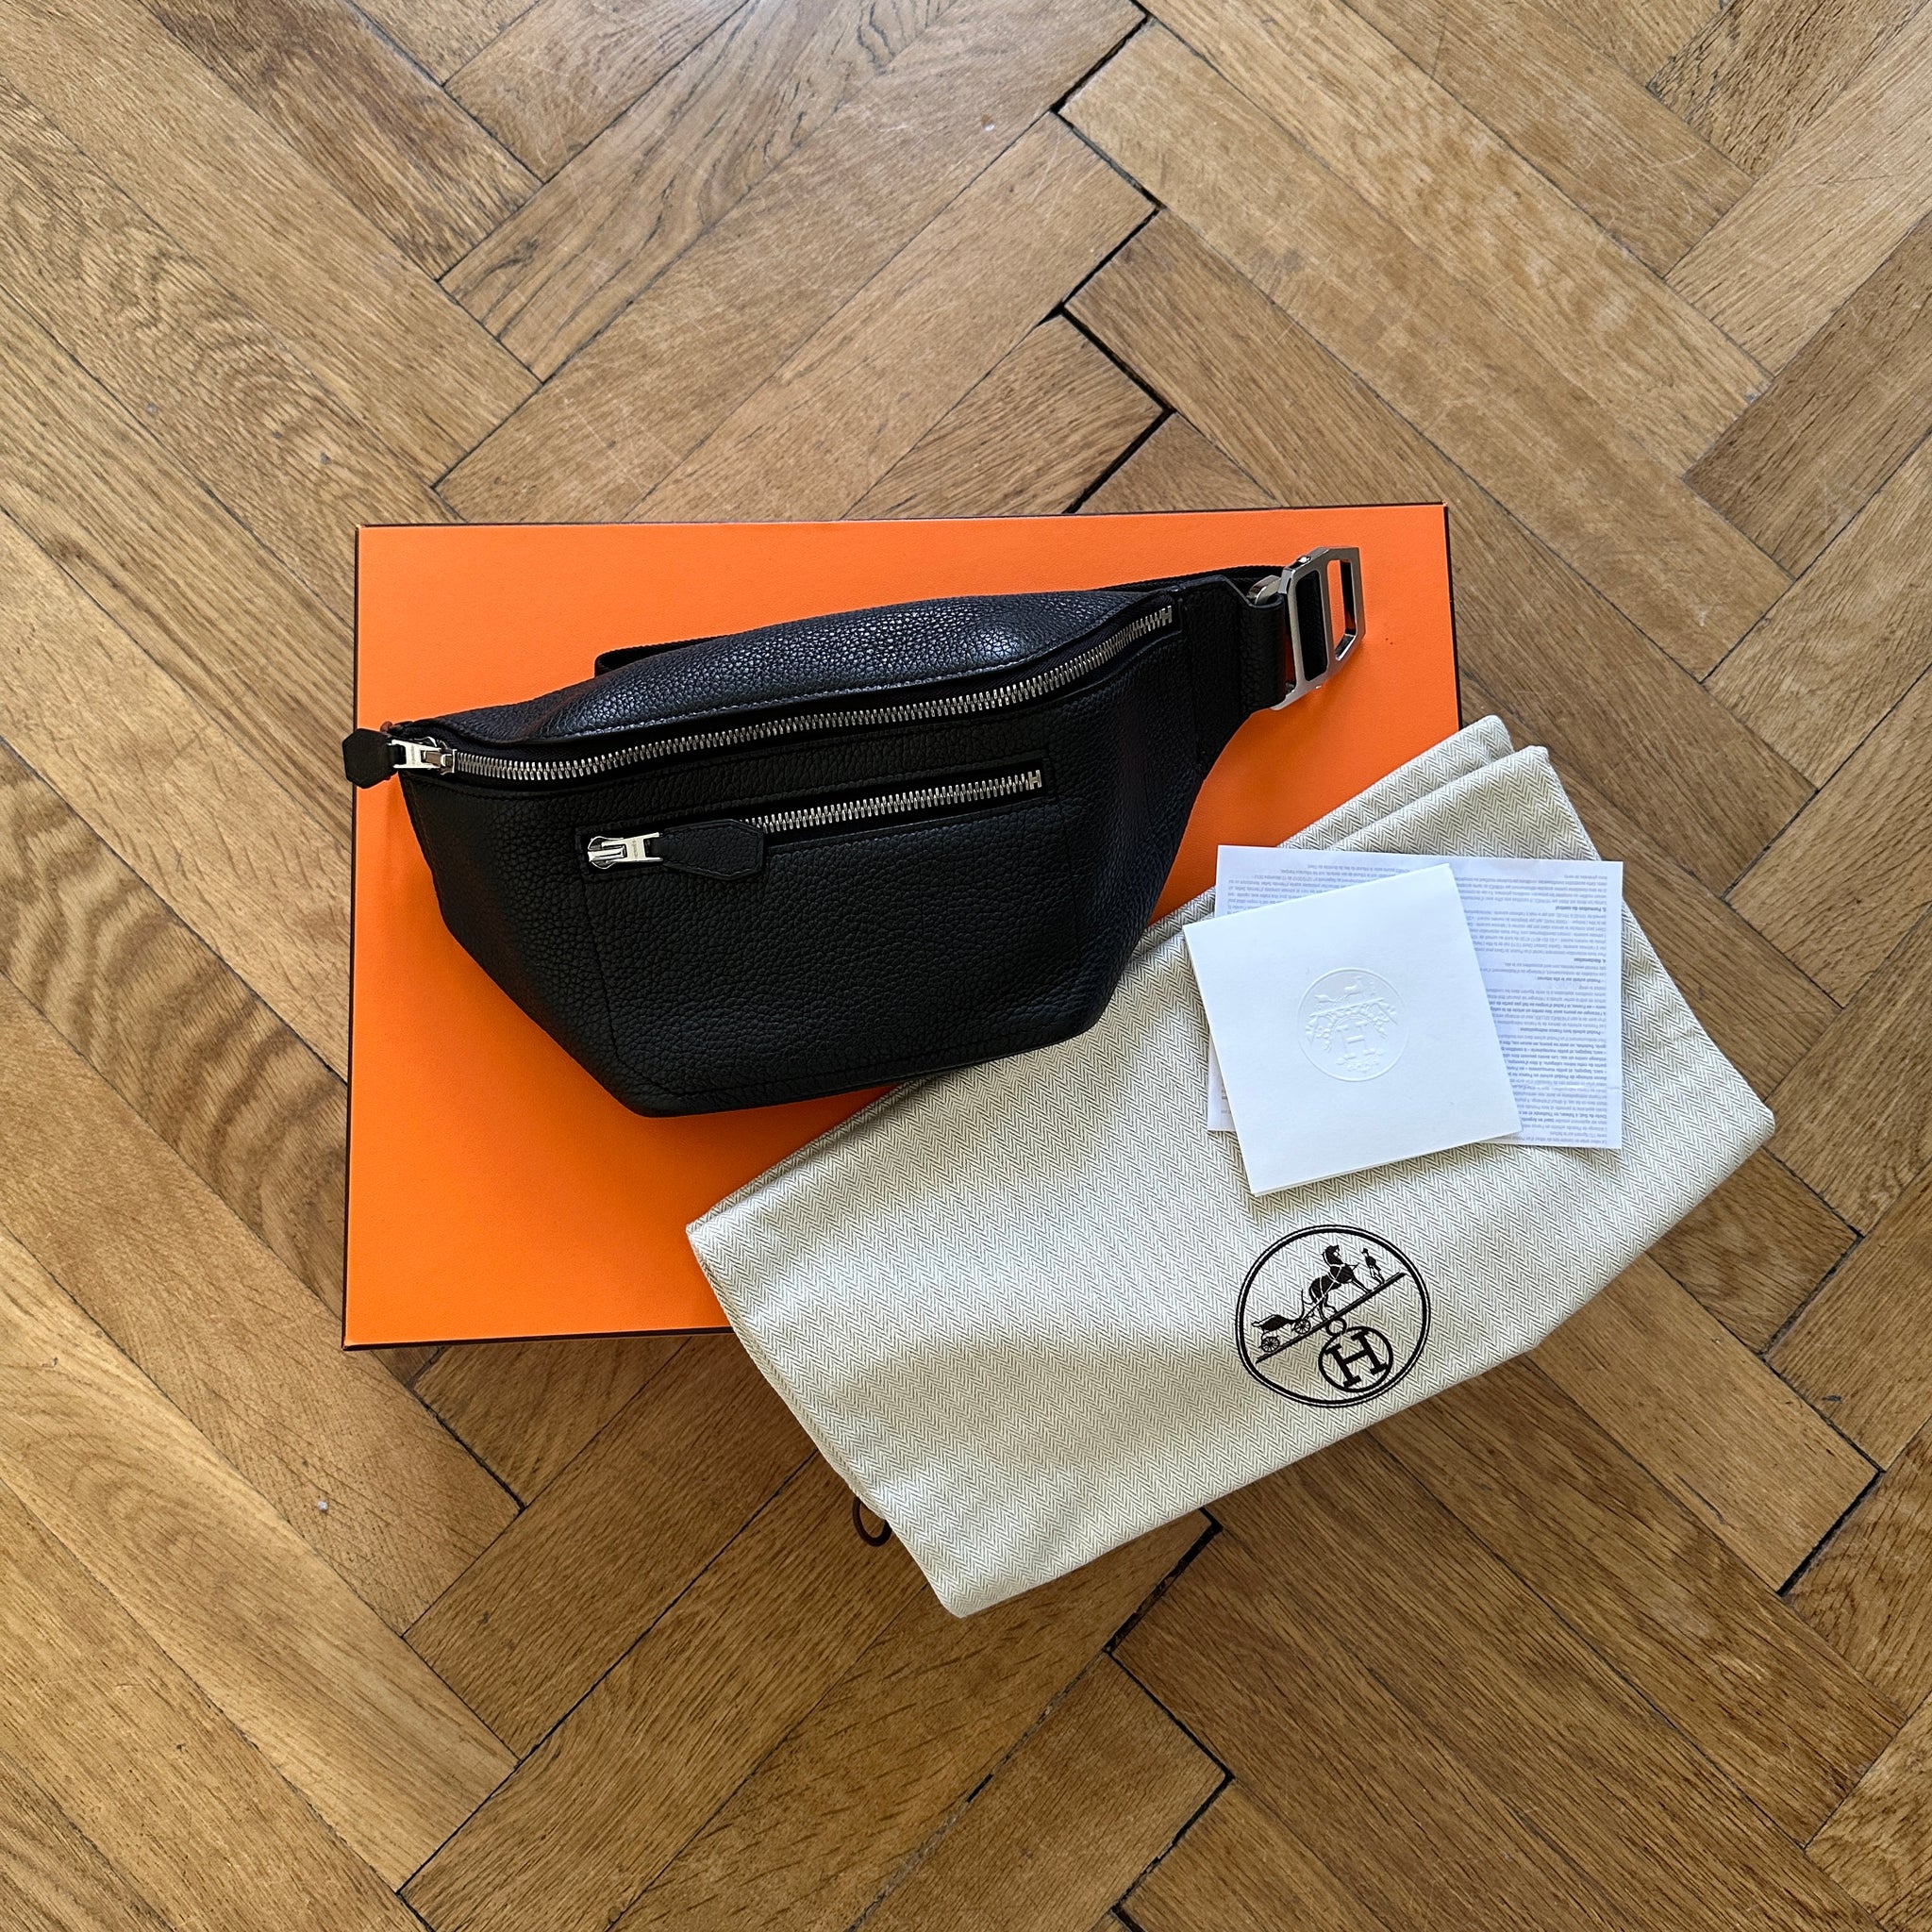 Black Grained Leather Hermes Belt Pouch